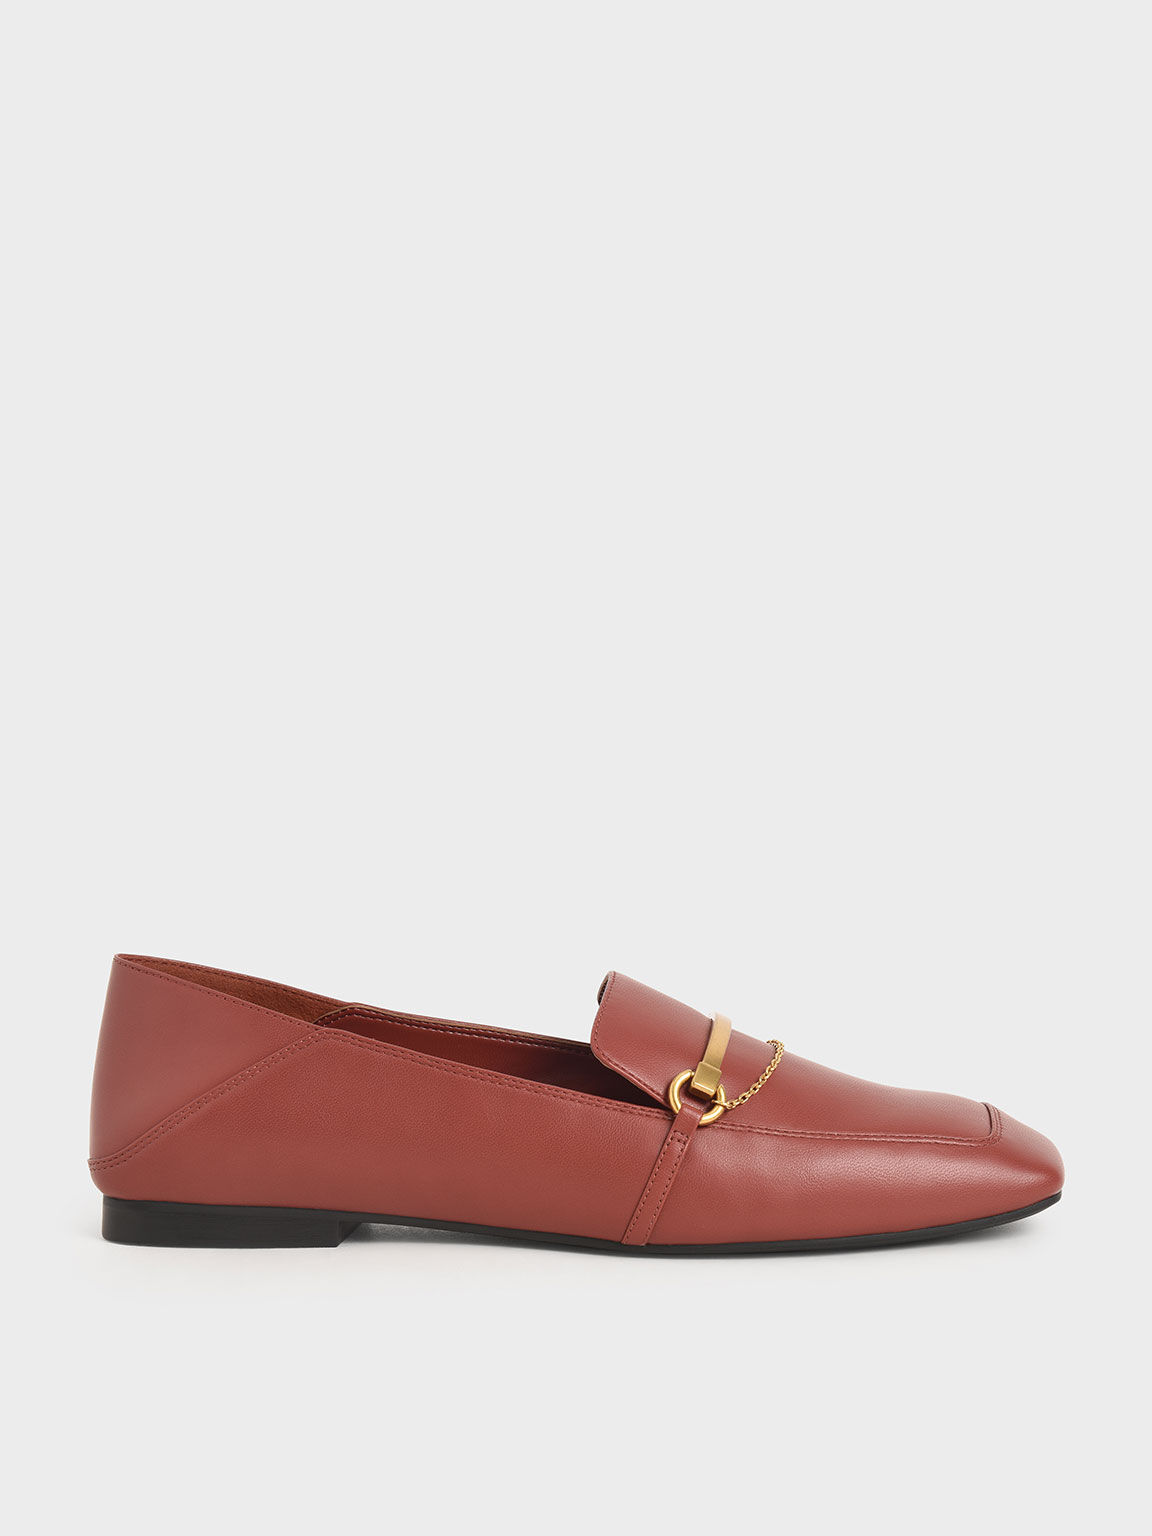 Metallic Accent Loafers, Red, hi-res